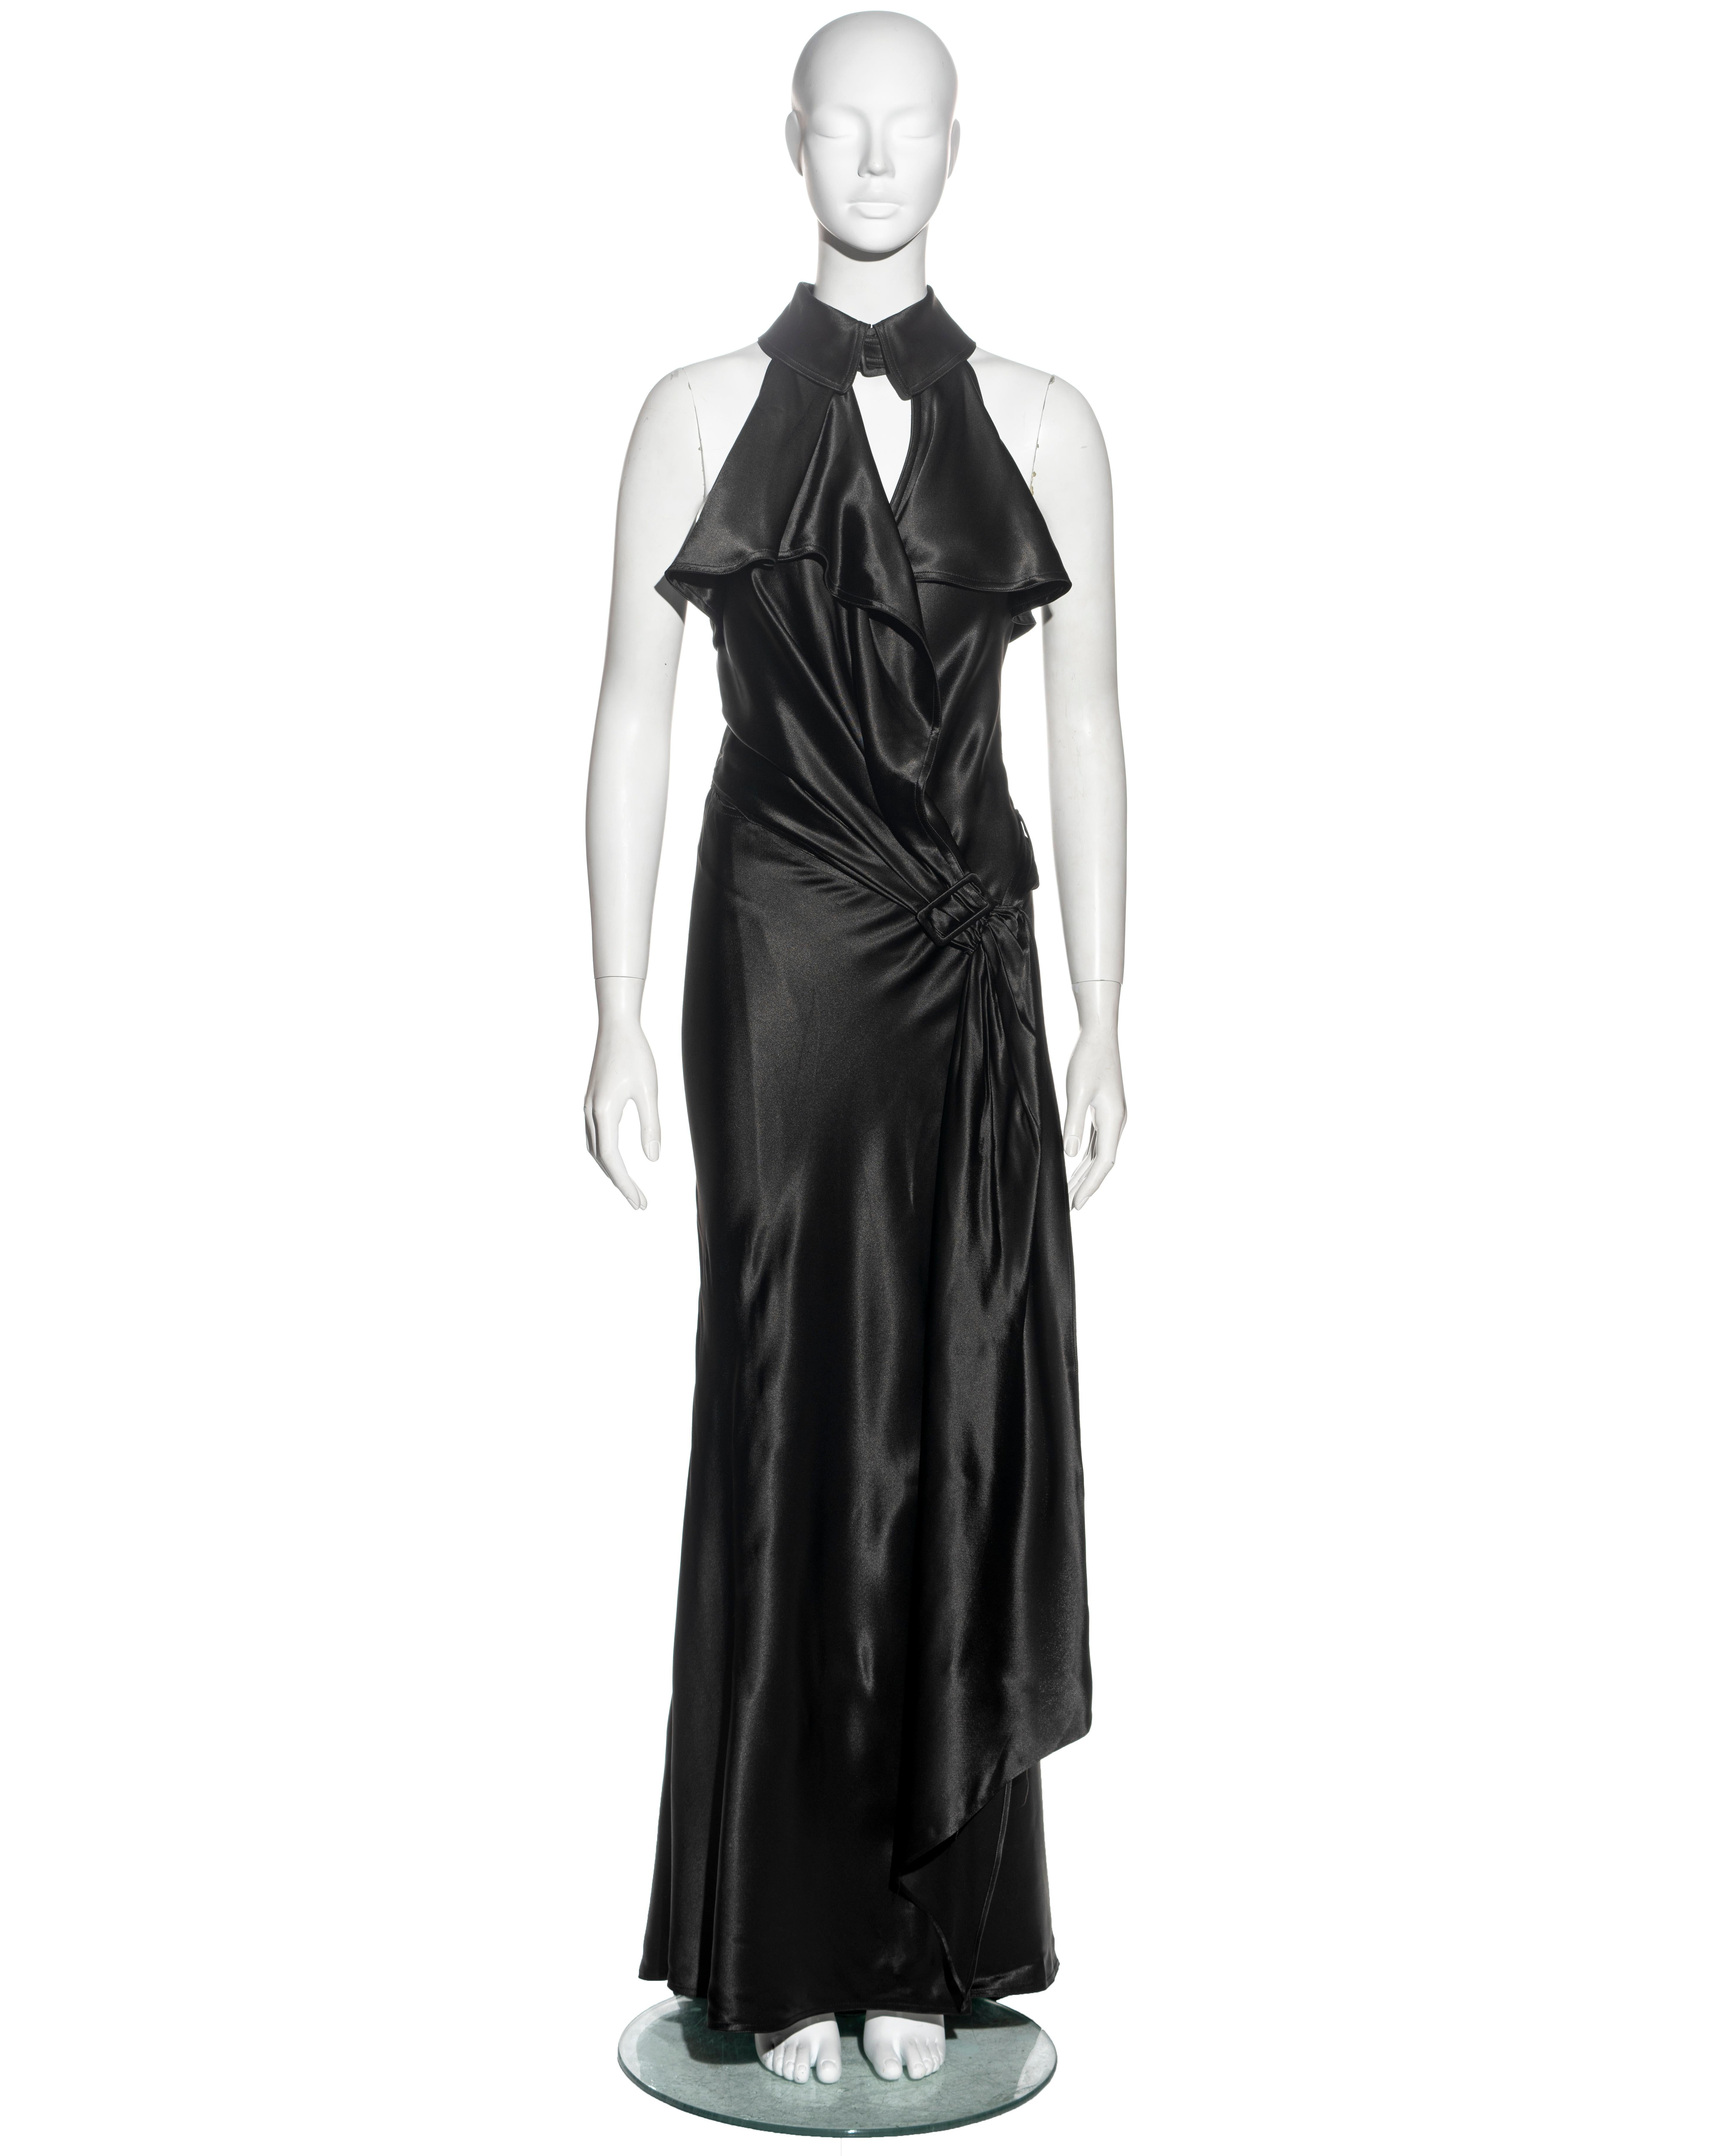 ▪ Jean Paul Gaultier evening wrap dress
▪ Sold by One of a Kind Archive
▪ Constructed from black rayon-blend satin 
▪ Trench-style 
▪ Asymmetric draped bodice 
▪ Open back 
▪ Wrap fastening with built-in belt 
▪ IT 40 - FR 36 - UK 8
▪ Fall-Winter